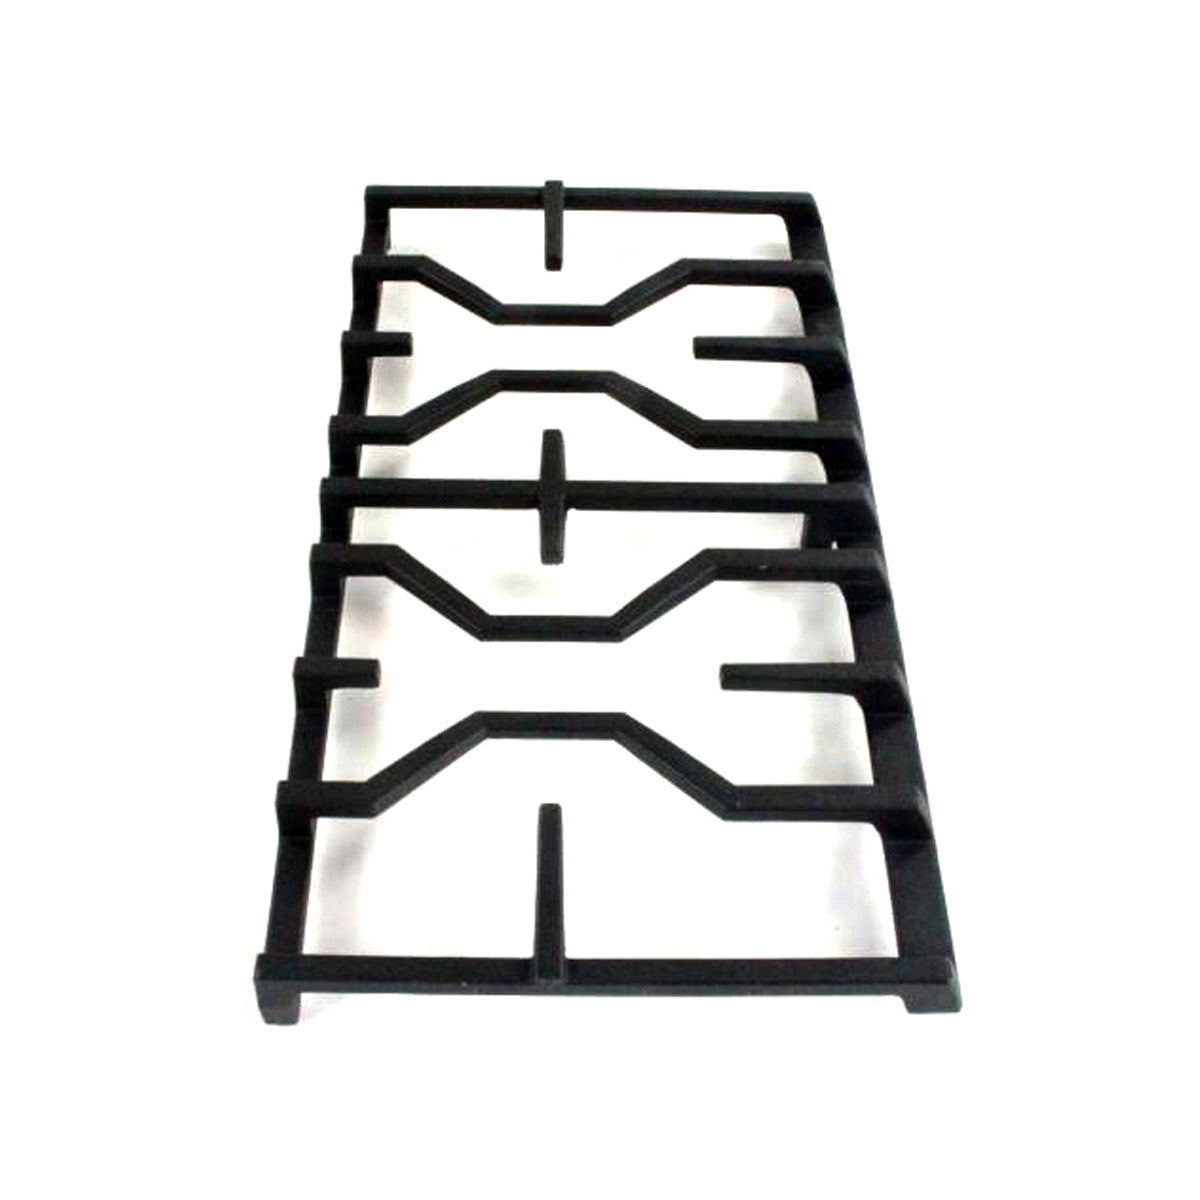 LG AEB75144901 Fan Grille Assembly